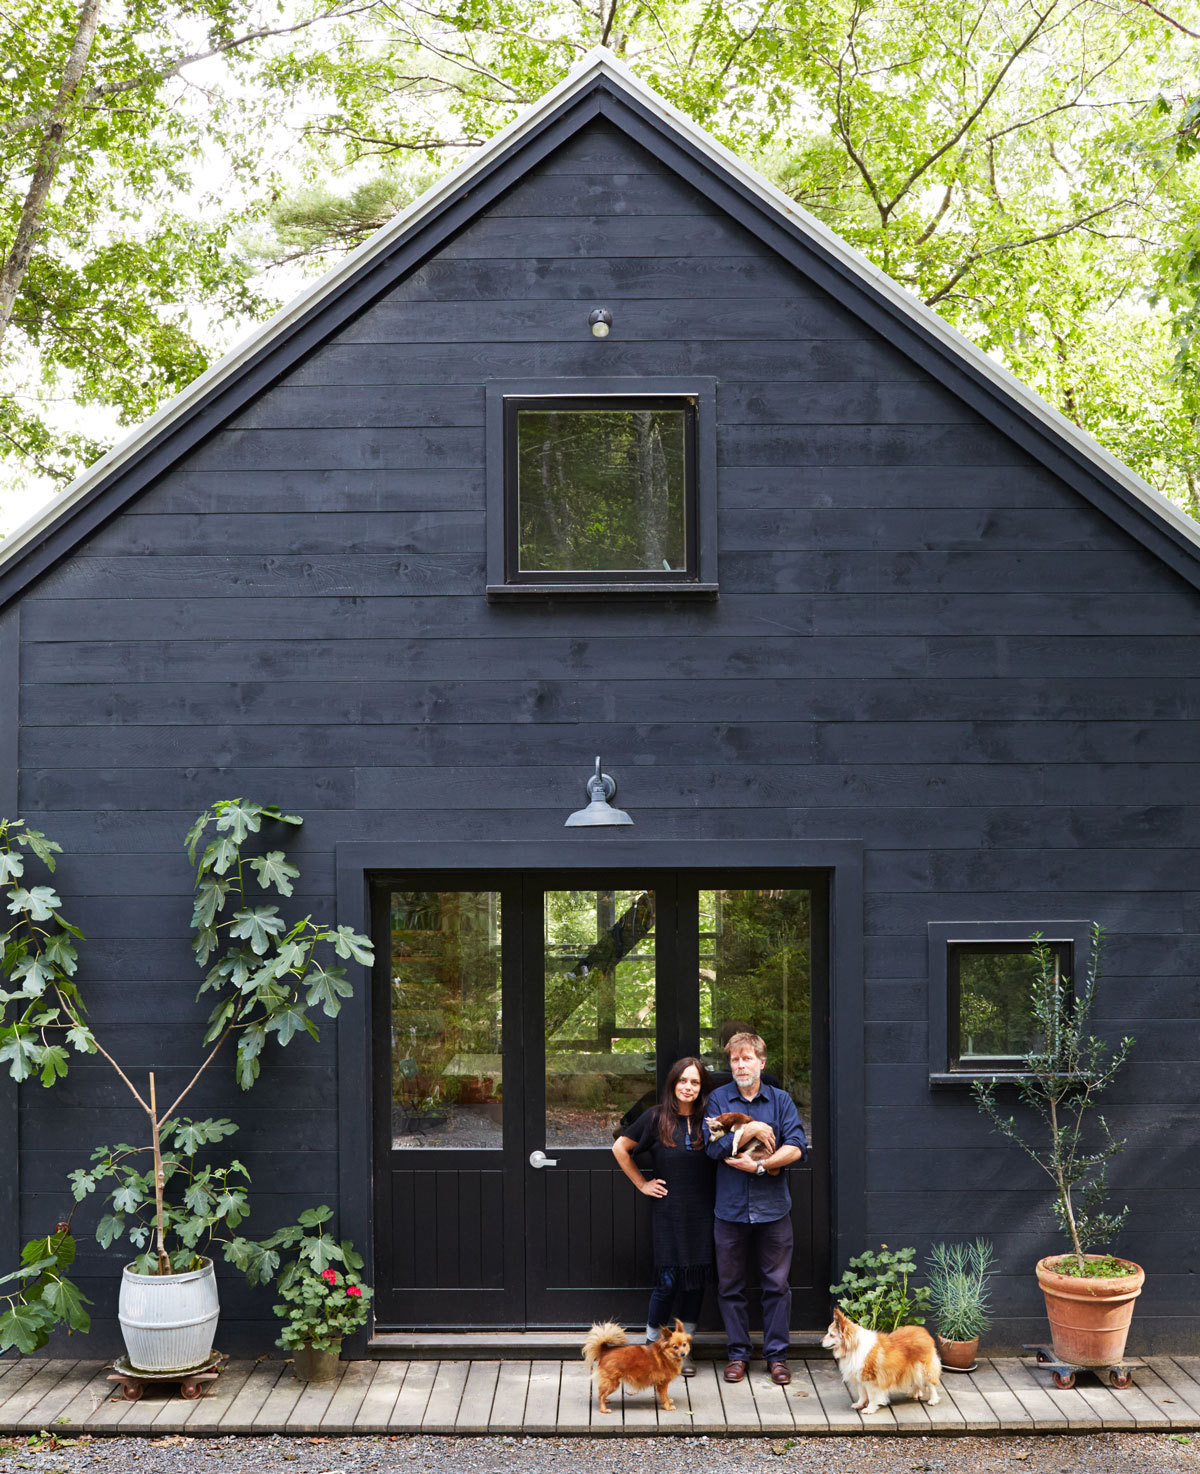 A very dark navy with black trimmed house and two people and their dogs on the deck.